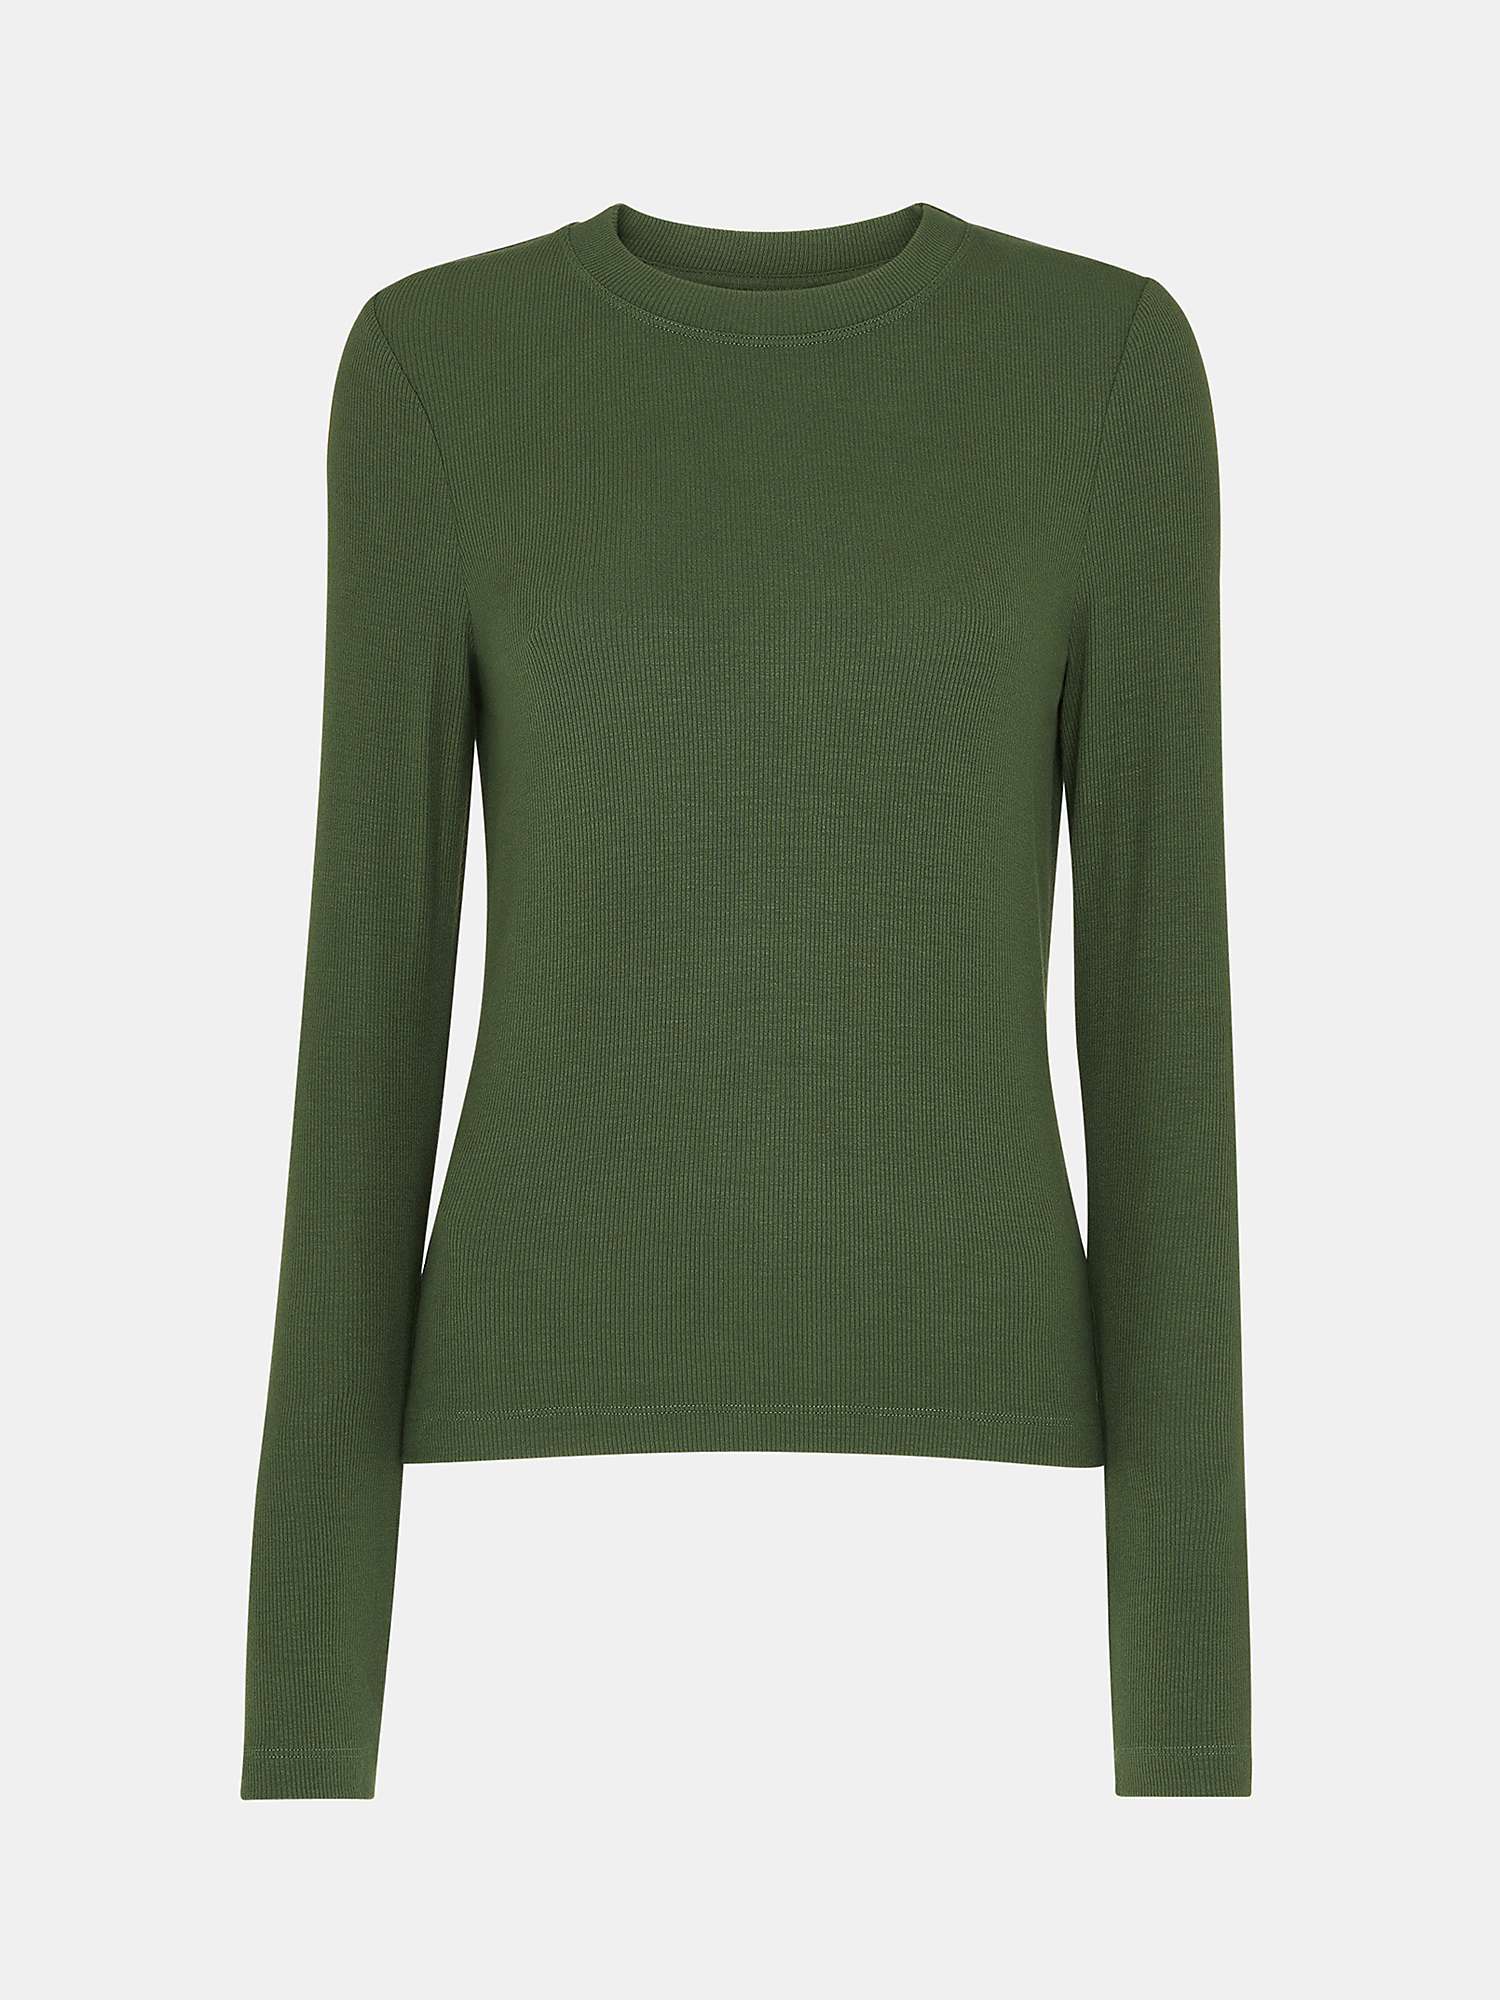 Buy Whistles Essential Ribbed Crew Neck Top Online at johnlewis.com